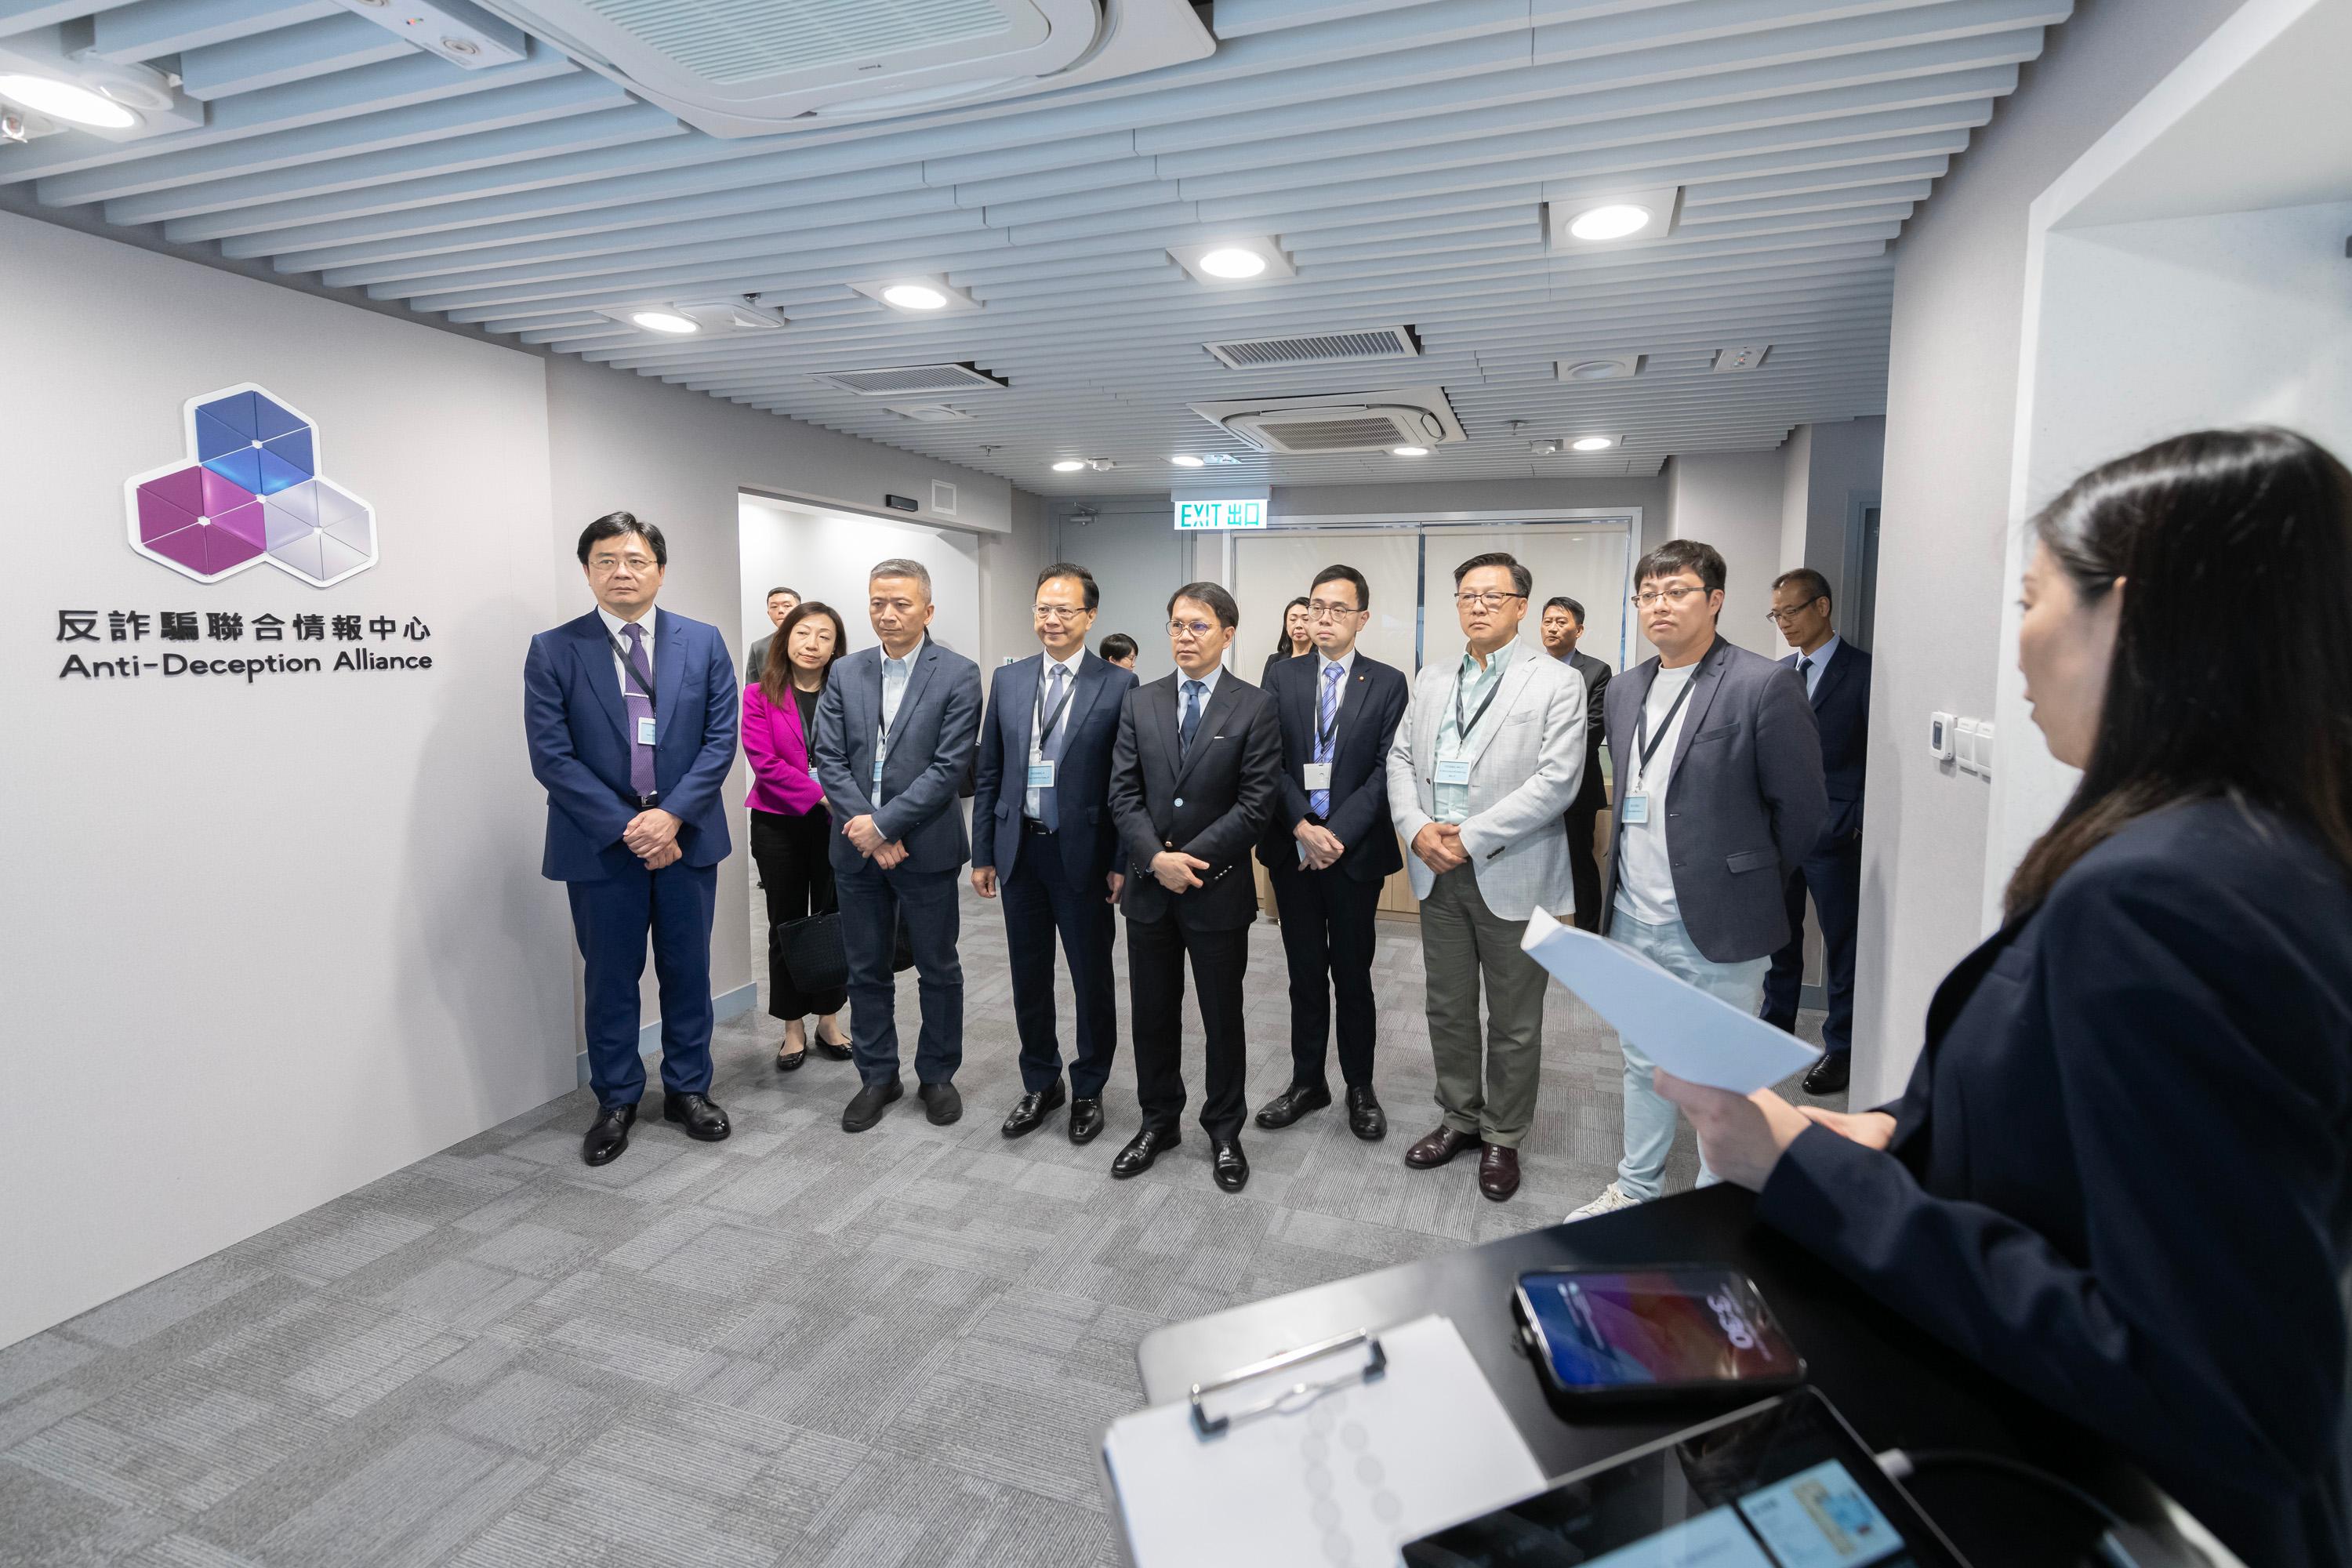 The Legislative Council (LegCo) Panel on Security visits the Anti-Deception Coordination Centre and the Anti-Deception Alliance (ADA) of the Hong Kong Police Force today (April 23). Photo shows LegCo Members visiting the ADA to learn about the latest joint measures implemented by the Police and the banking industry to combat deception cases.